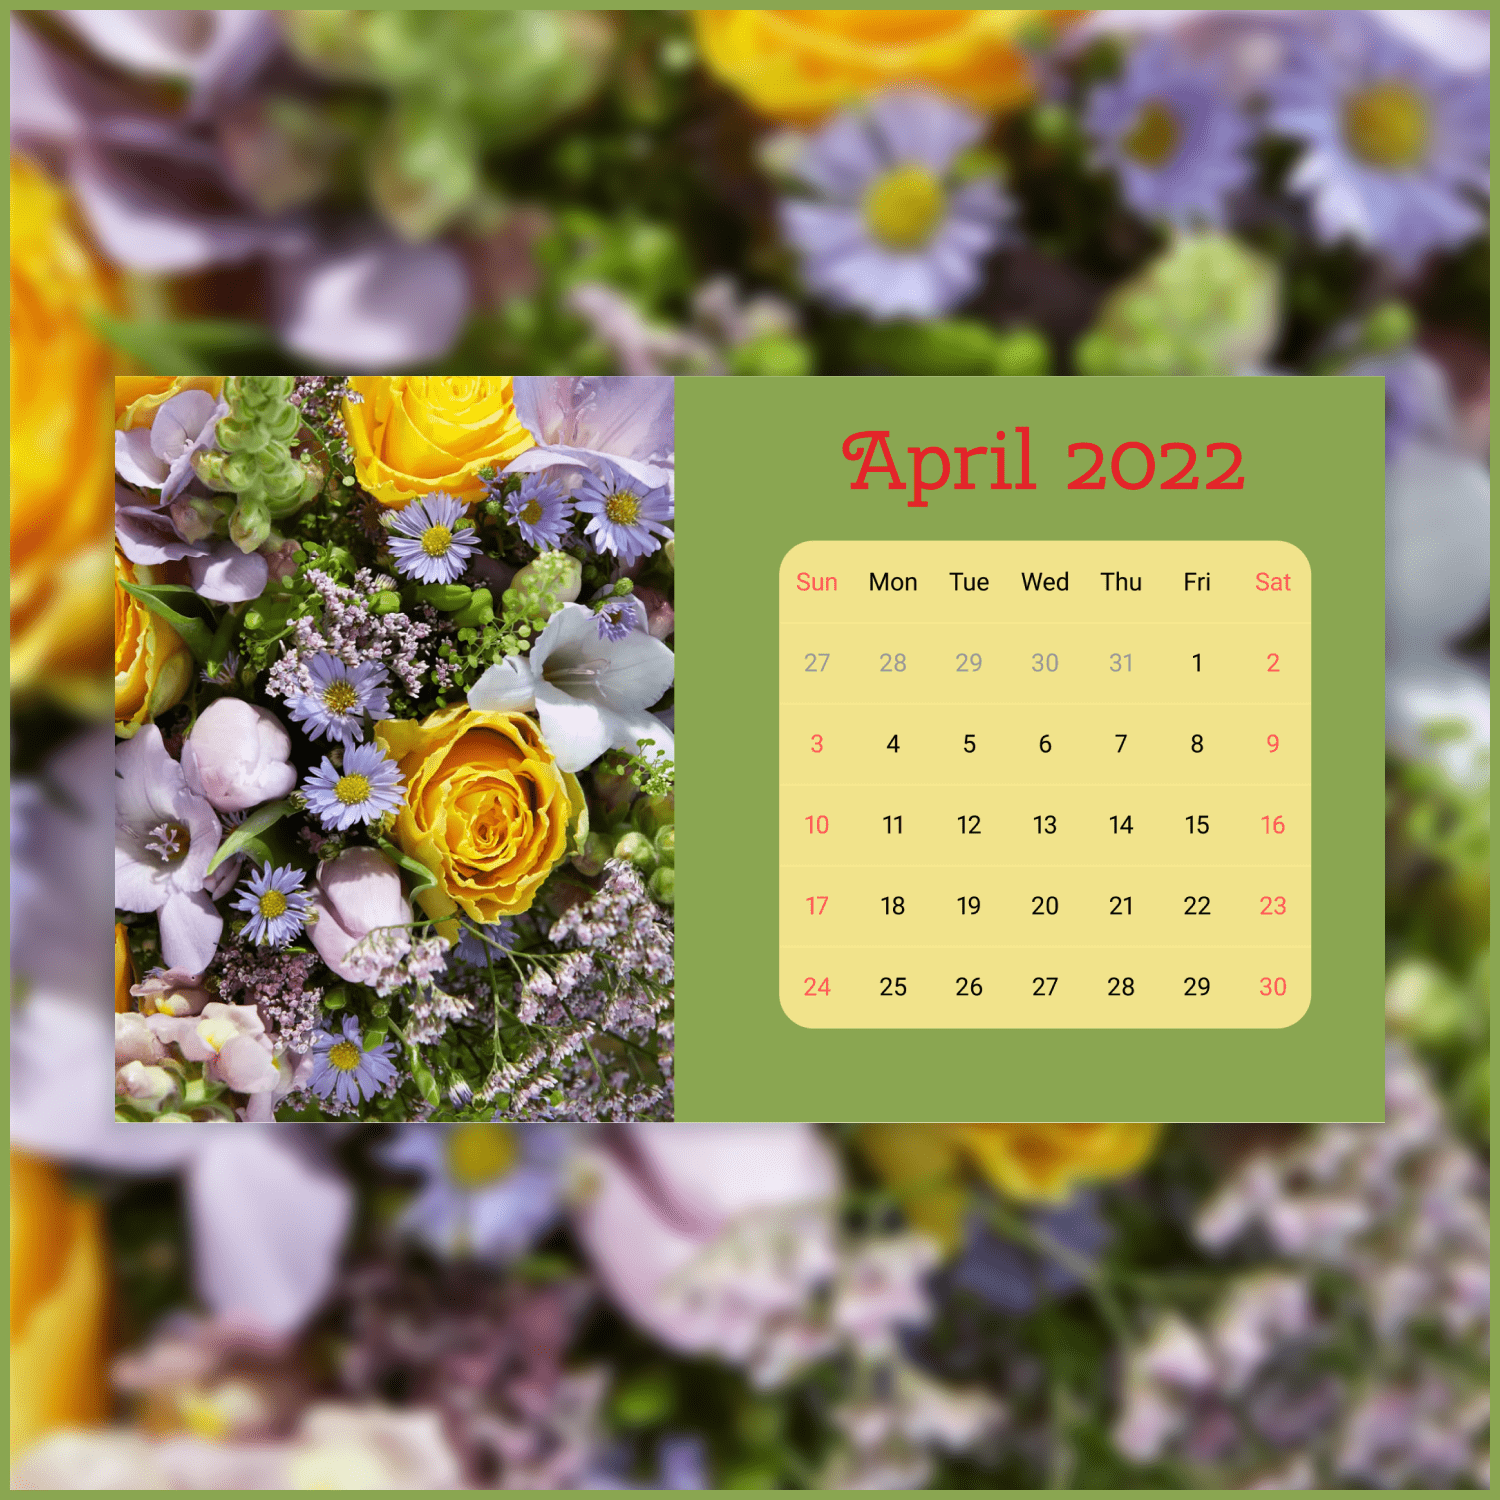 Bright and Juicy April Calendar with Yellow and Purple Flowers for 2022 cover.